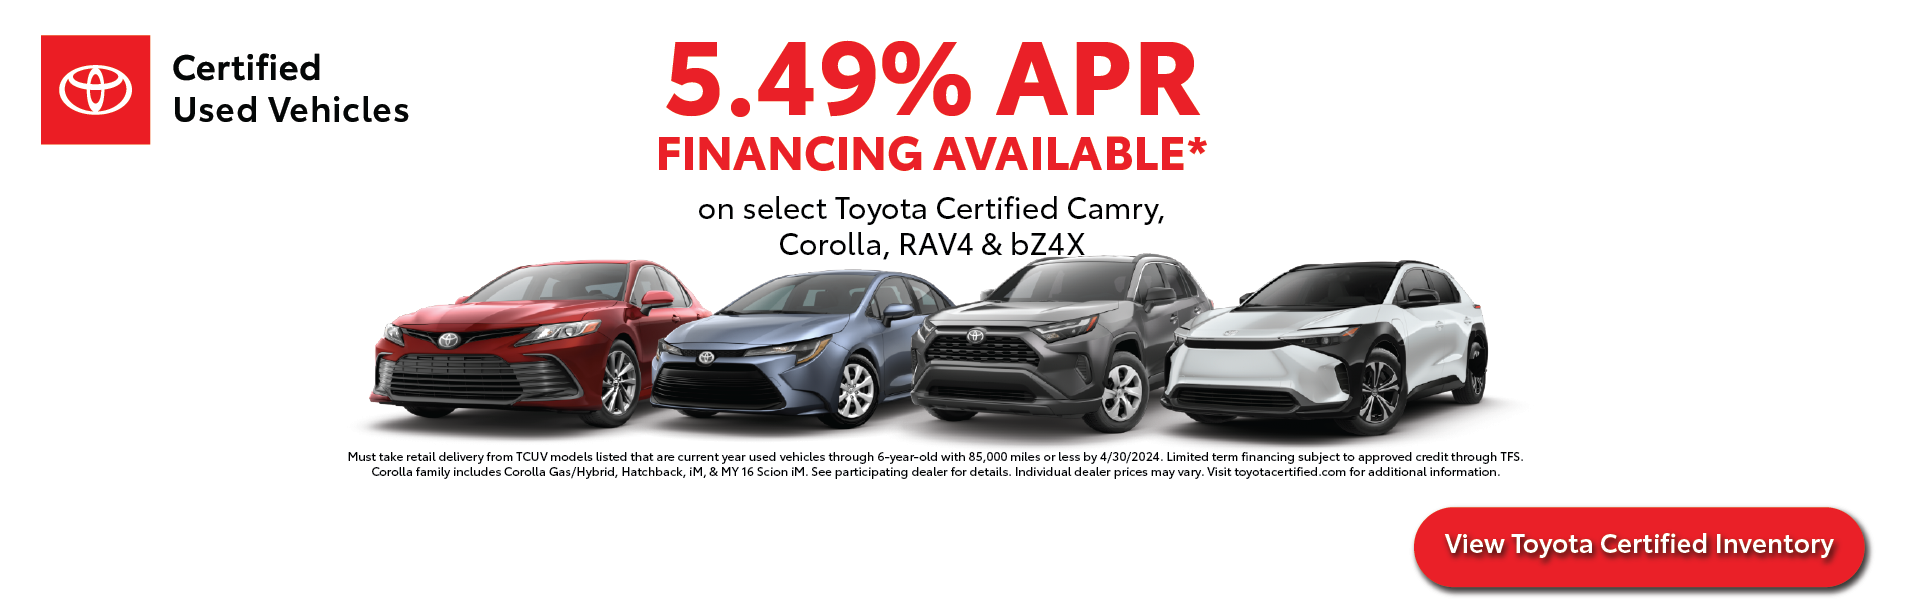 Toyota Certified Used Vehicle Offer | Monken Toyota of Mt. Vernon in Mt Vernon IL